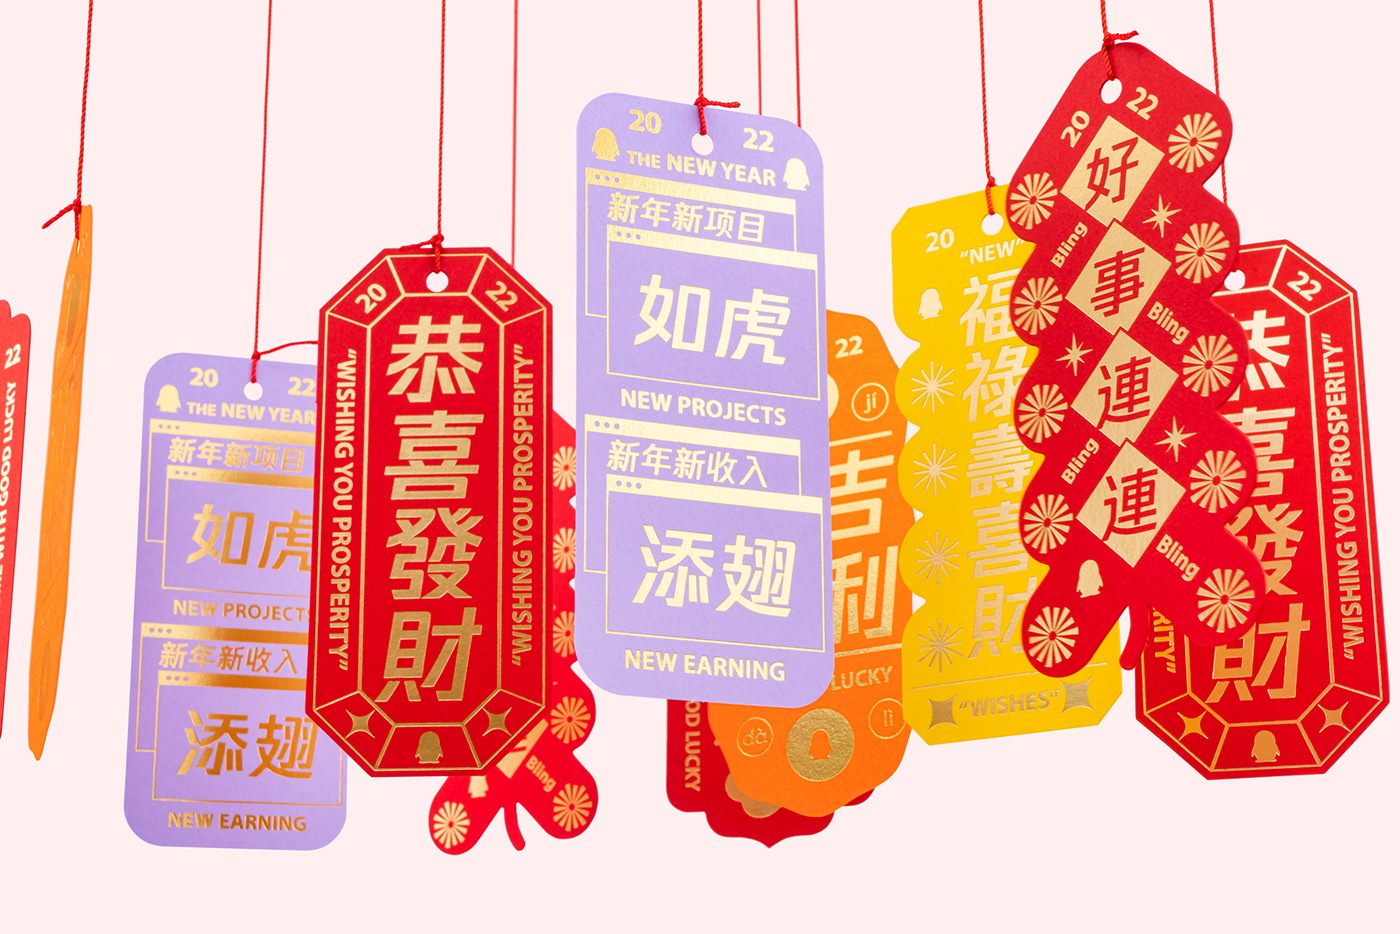 bag design chinese new year cny gifts greeting card Presents 新年礼包 春节礼包 祝福卡